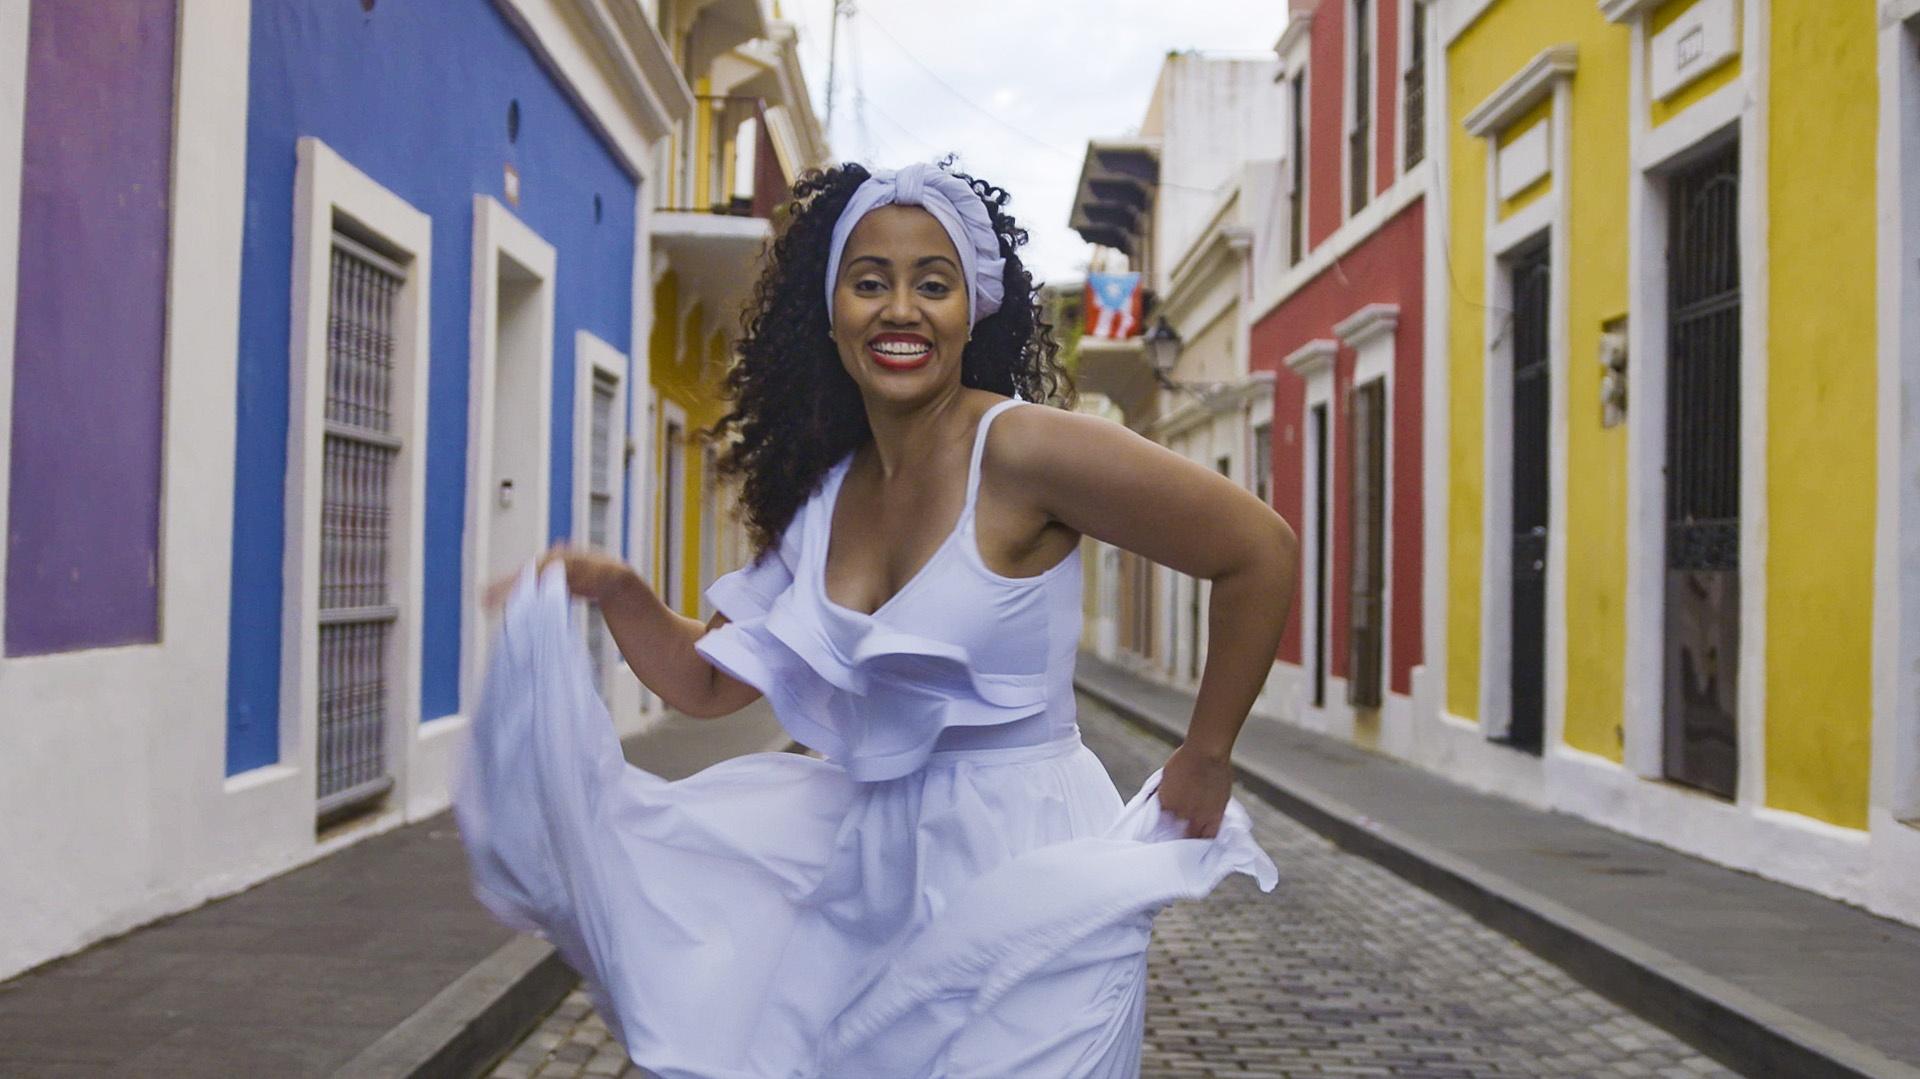 A woman in a white dress dancing the bomba in a street.